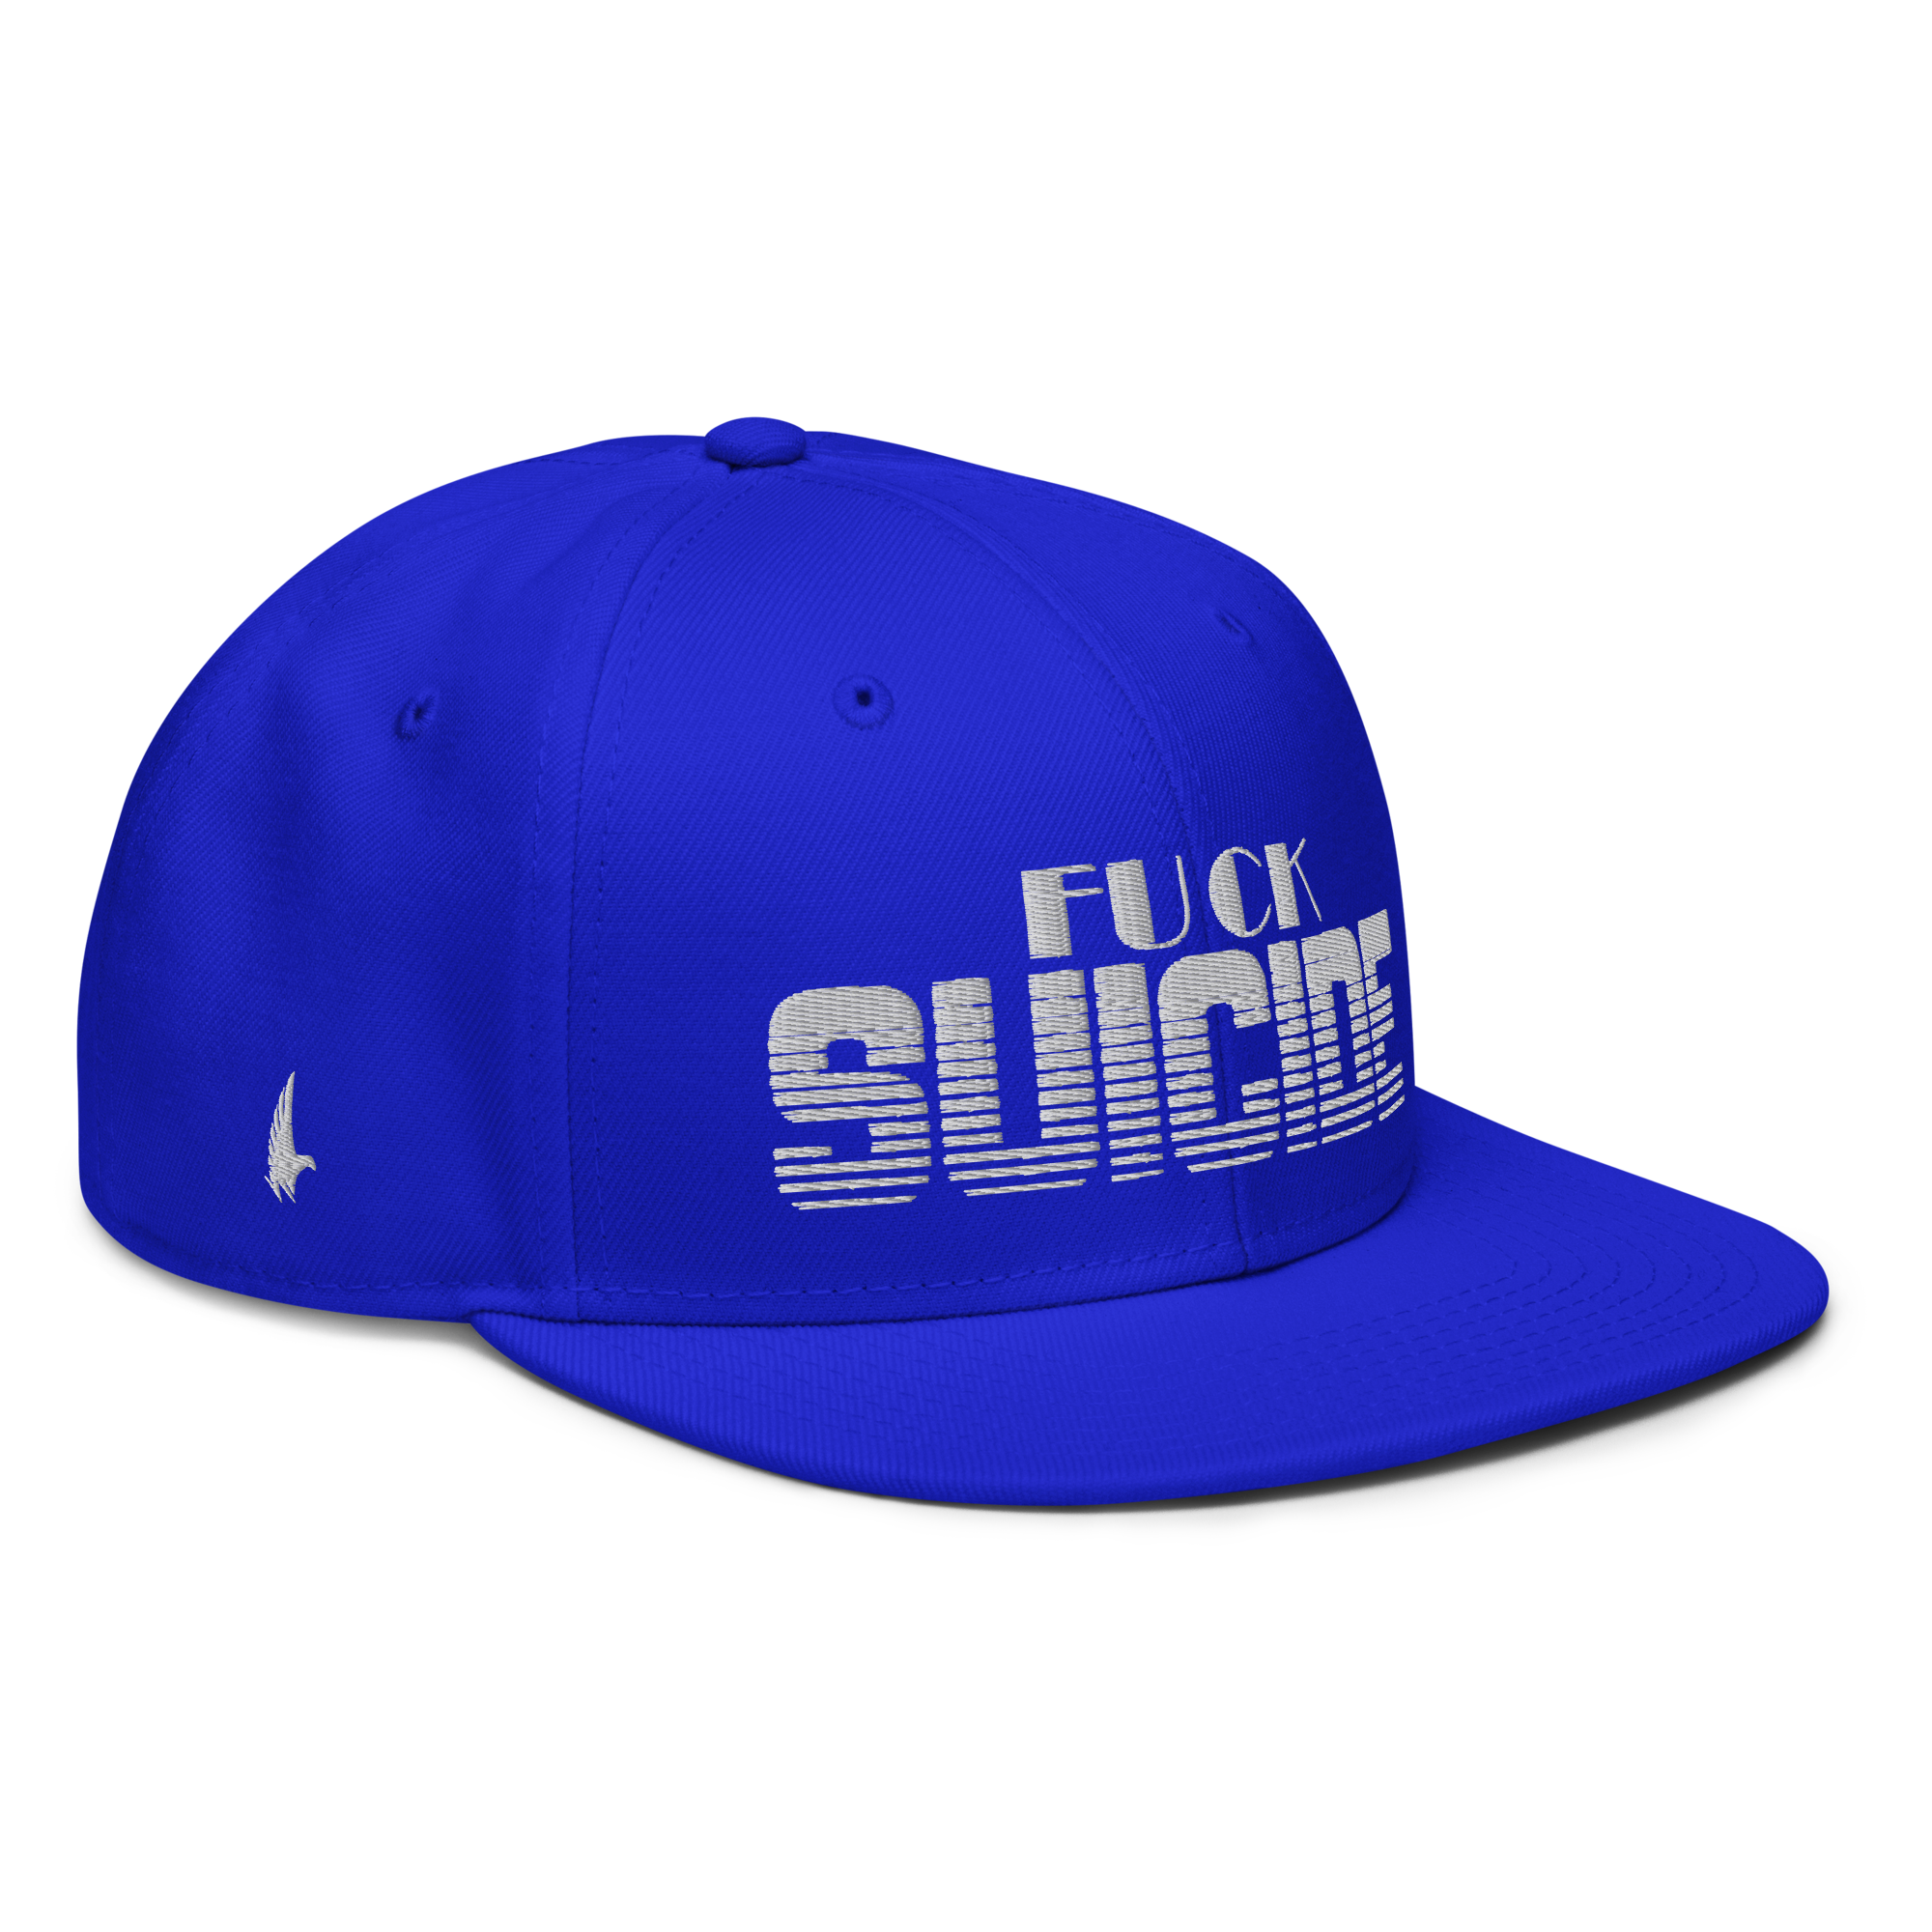 Fk Suicide Snapback Hat - Blue OS - Loyalty Vibes